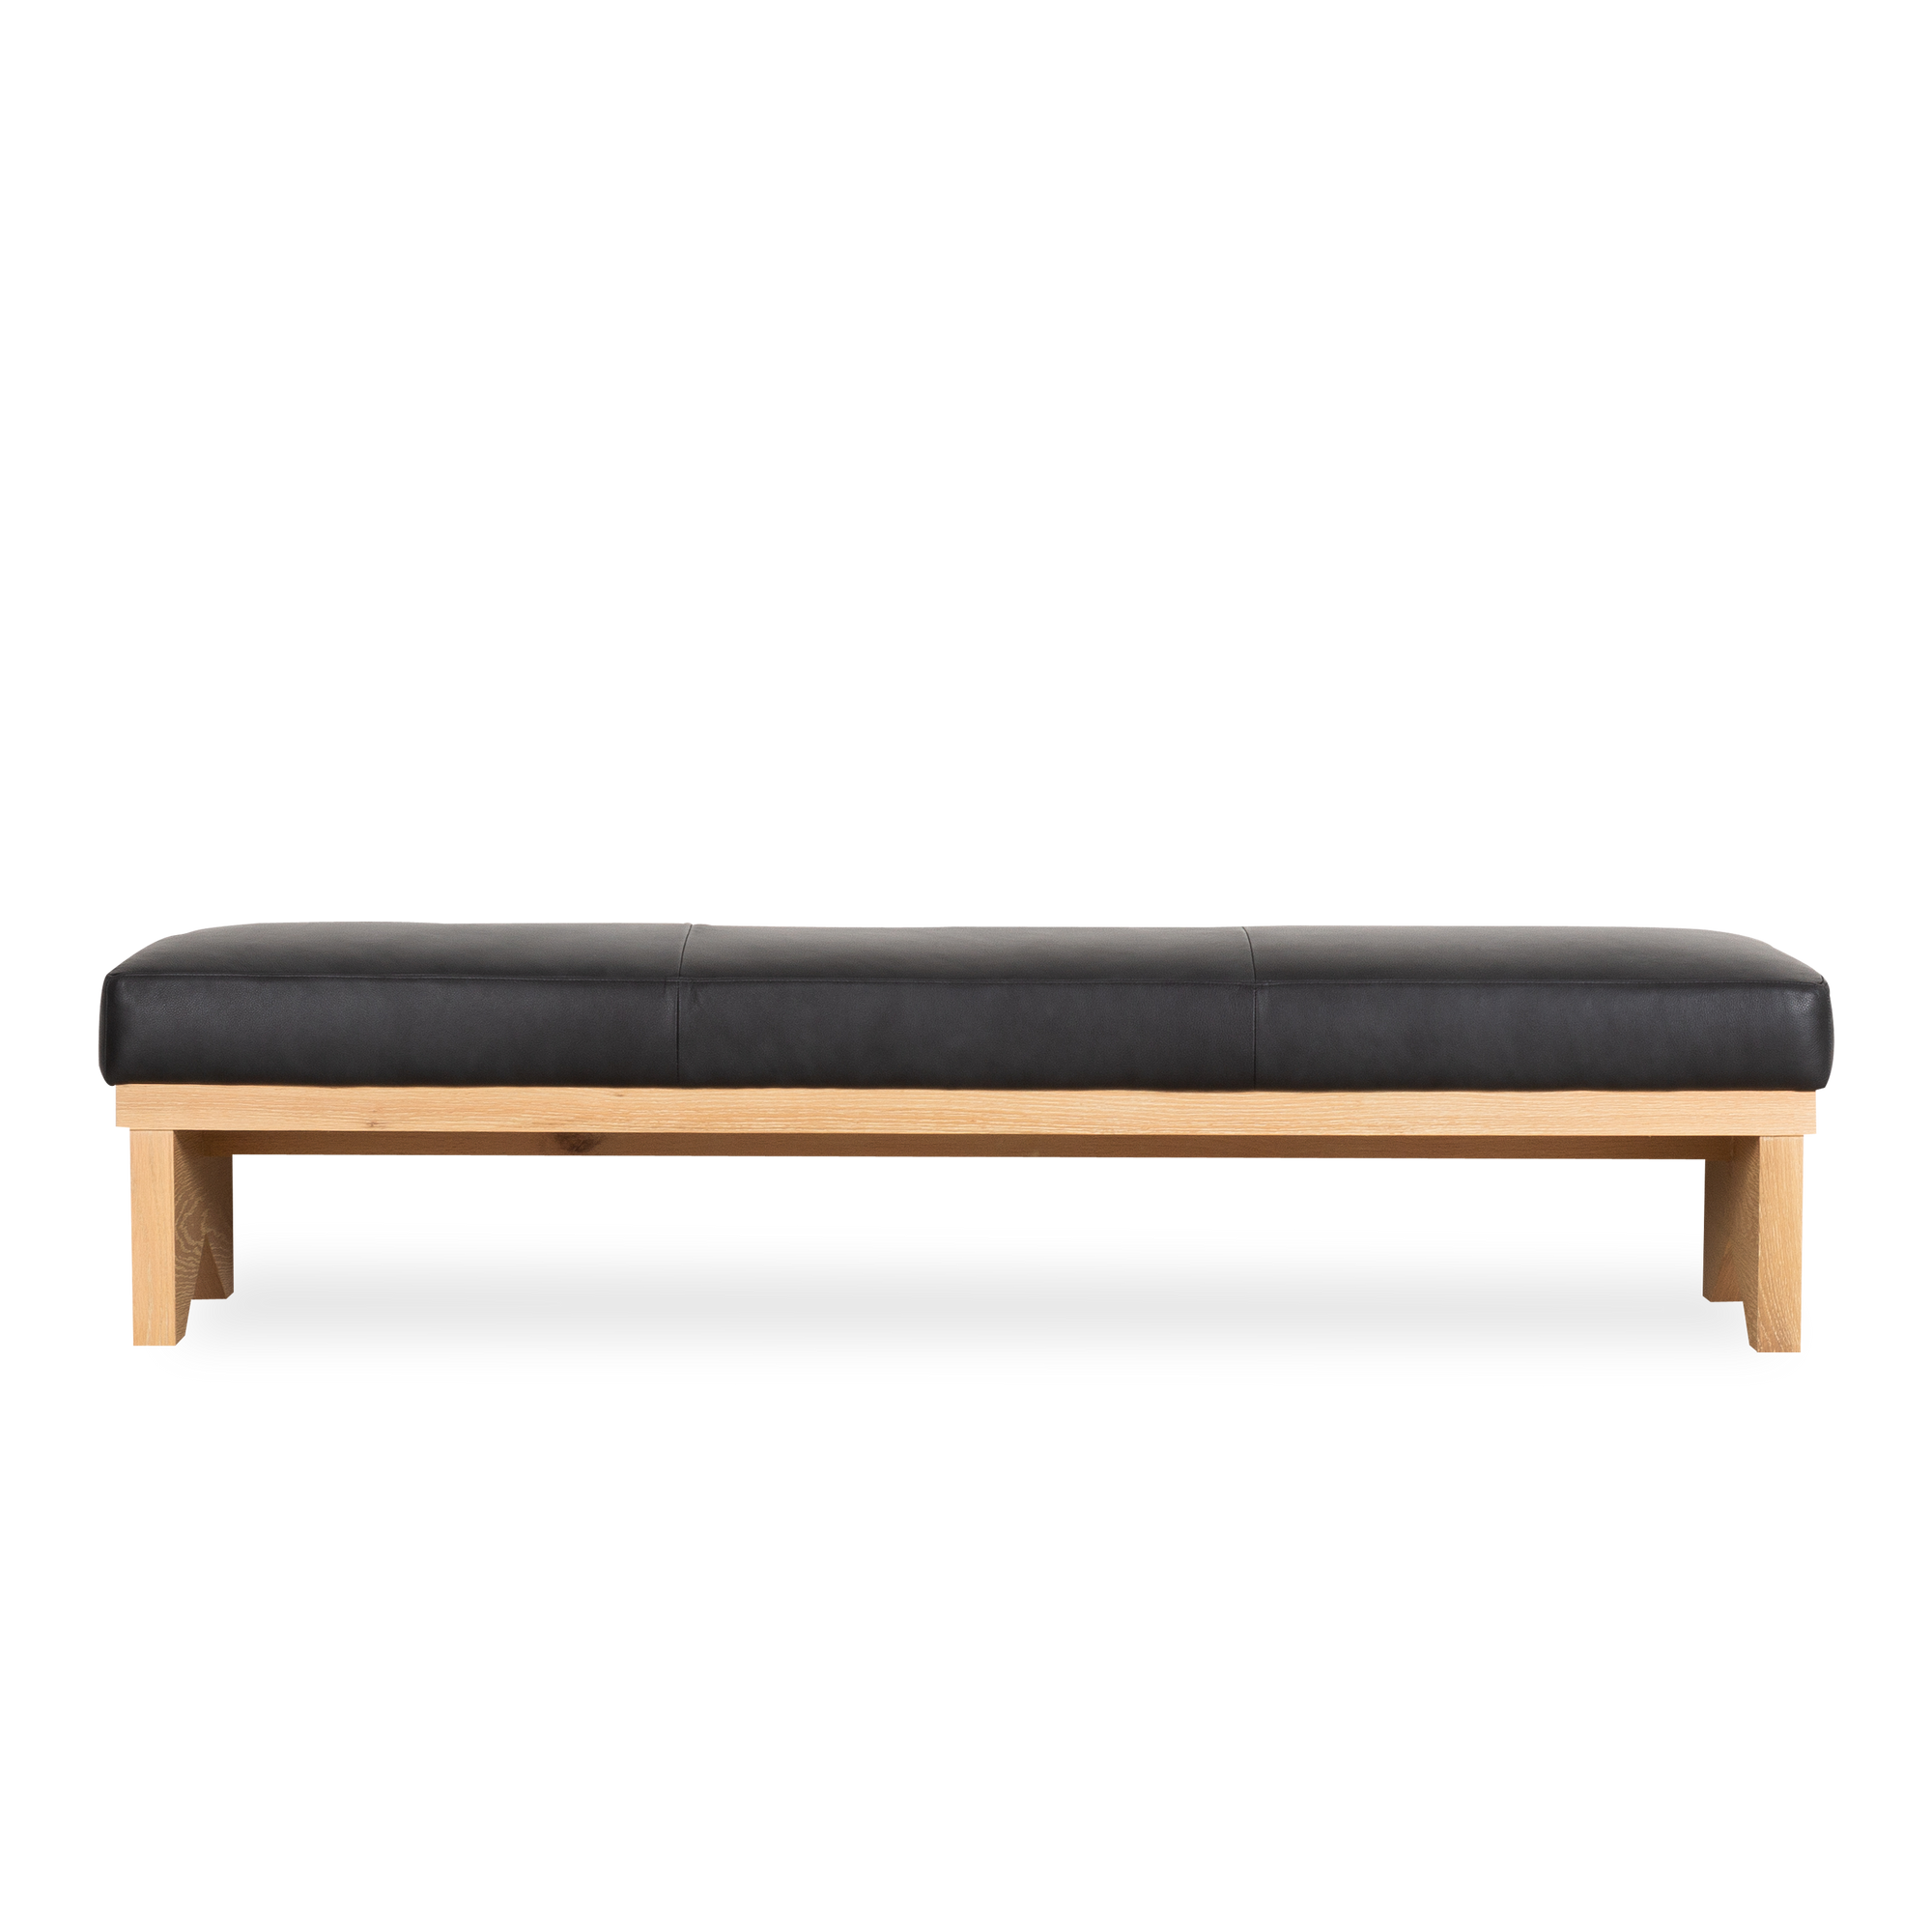 Inspired by the legacy of the famous designer Pierre Jeanneret, the Pierre Bench offers a timeless design.